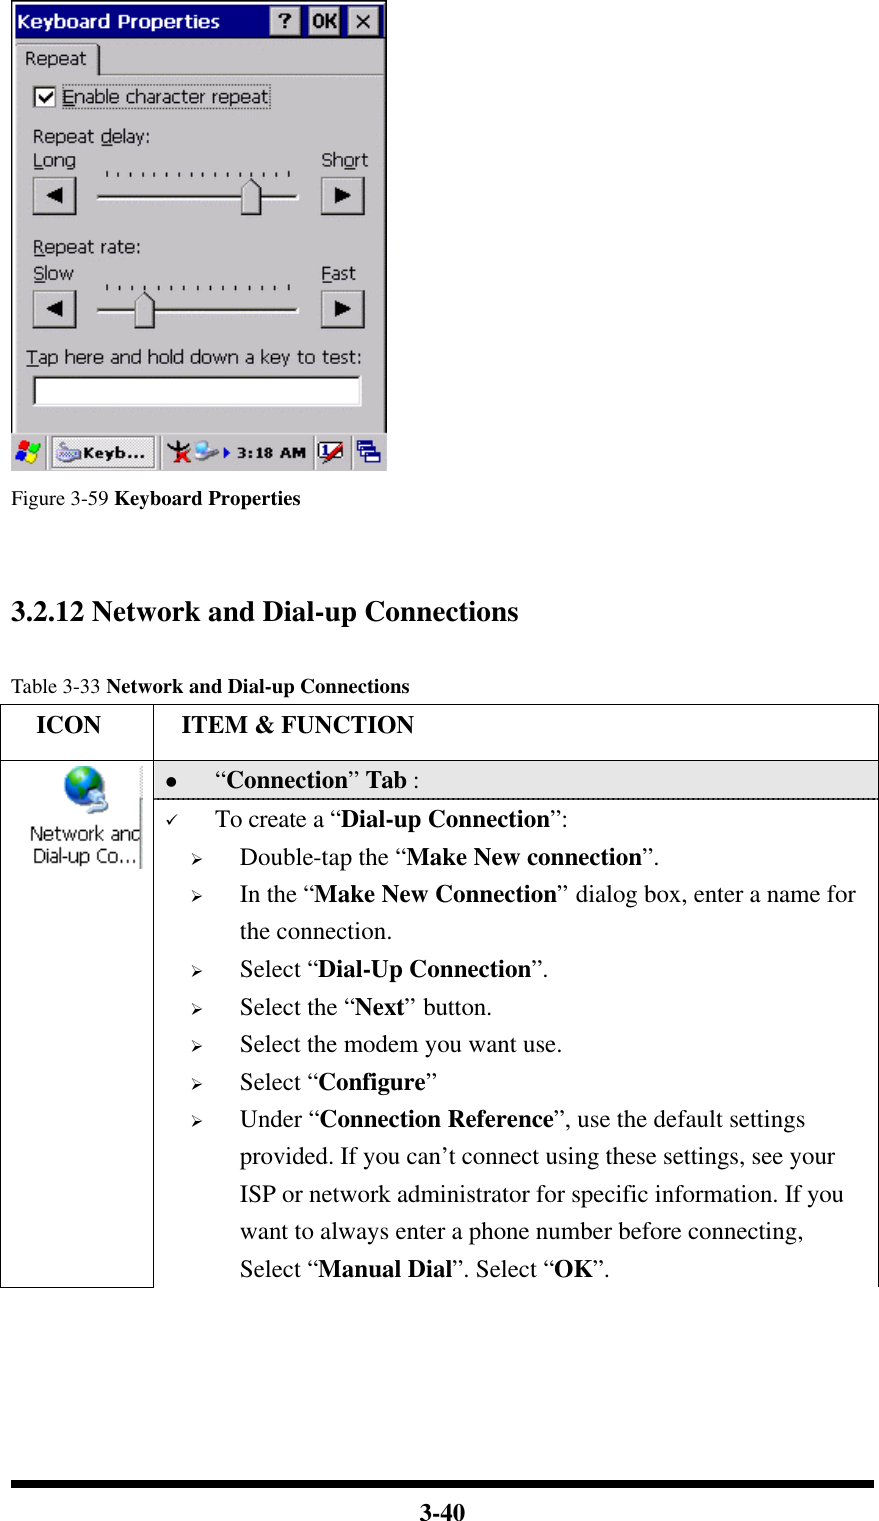  3-40  Figure 3-59 Keyboard Properties   3.2.12 Network and Dial-up Connections  Table 3-33 Network and Dial-up Connections   ICON  ITEM &amp; FUNCTION l “Connection” Tab :    ü To create a “Dial-up Connection”: Ø Double-tap the “Make New connection”. Ø In the “Make New Connection” dialog box, enter a name for the connection. Ø Select “Dial-Up Connection”. Ø Select the “Next” button. Ø Select the modem you want use. Ø Select “Configure” Ø Under “Connection Reference”, use the default settings provided. If you can’t connect using these settings, see your ISP or network administrator for specific information. If you want to always enter a phone number before connecting, Select “Manual Dial”. Select “OK”. 